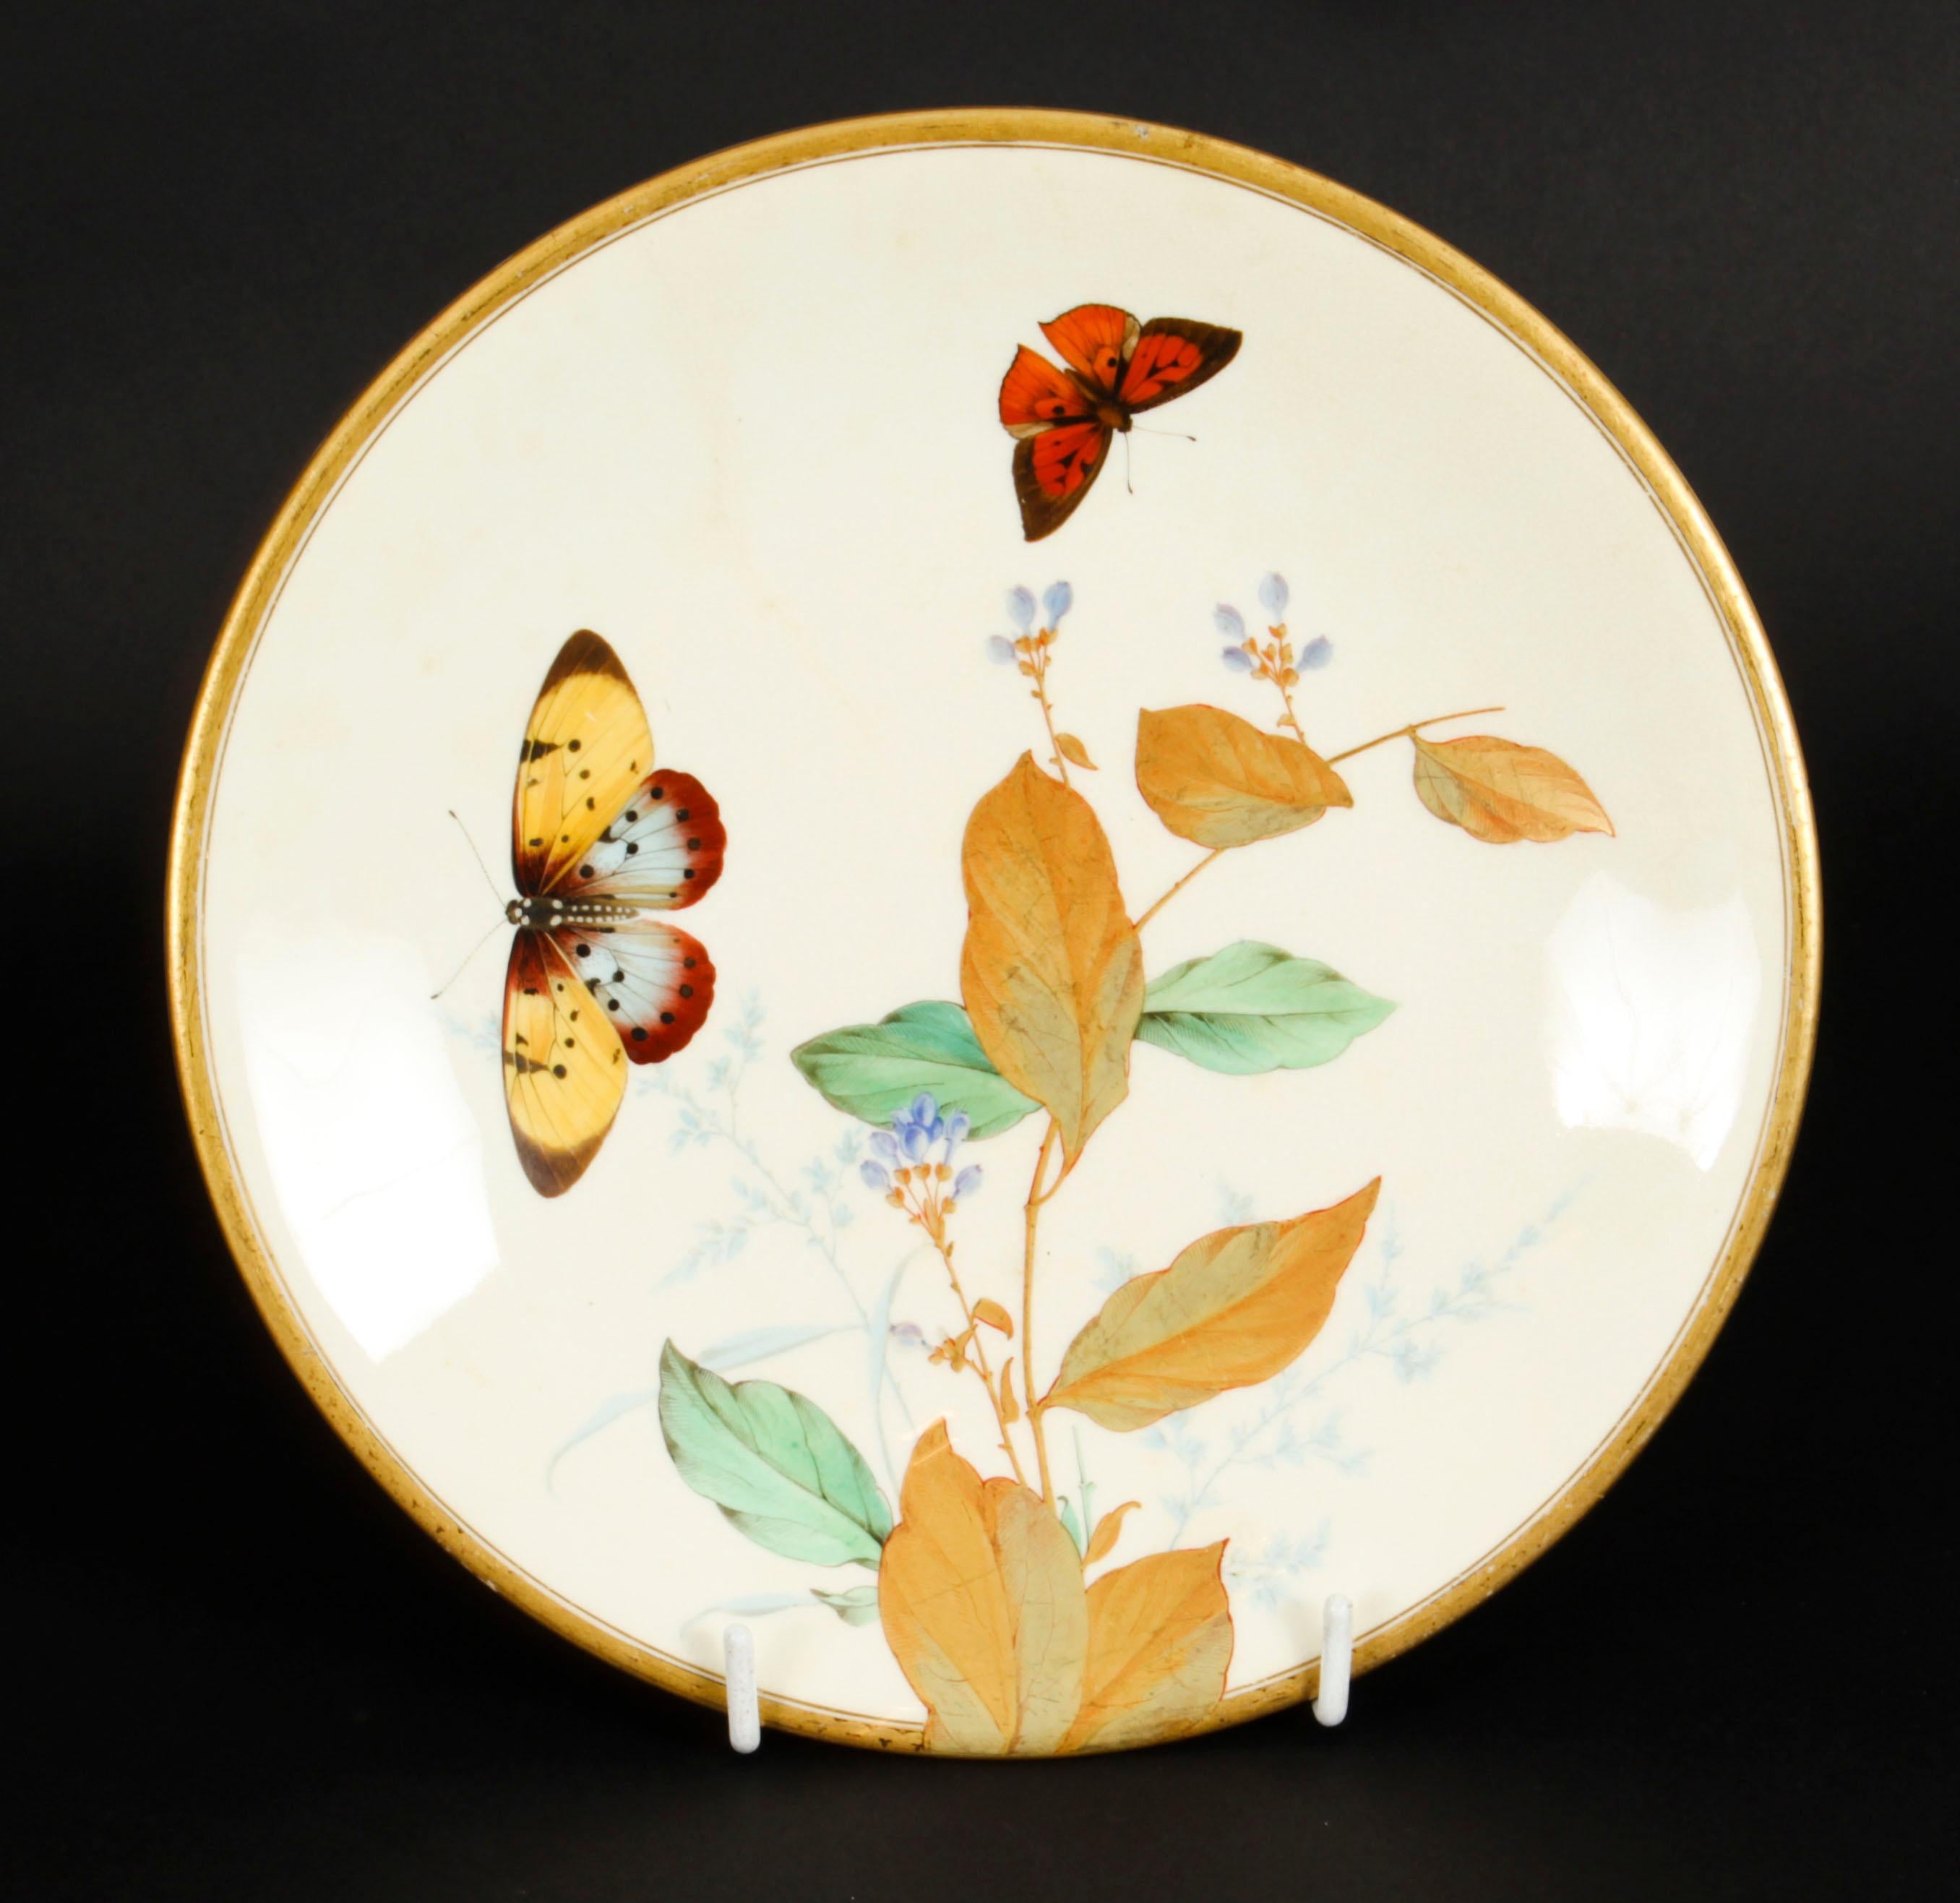 This is a lovely antique Minton Aesthetic Movement porcelain cabinet plate, circa 1880 in date. 

The centre is beautifully hand painted with foliate and floral ornamentation with two butterflie on a cream ground and within a gilt border.

On